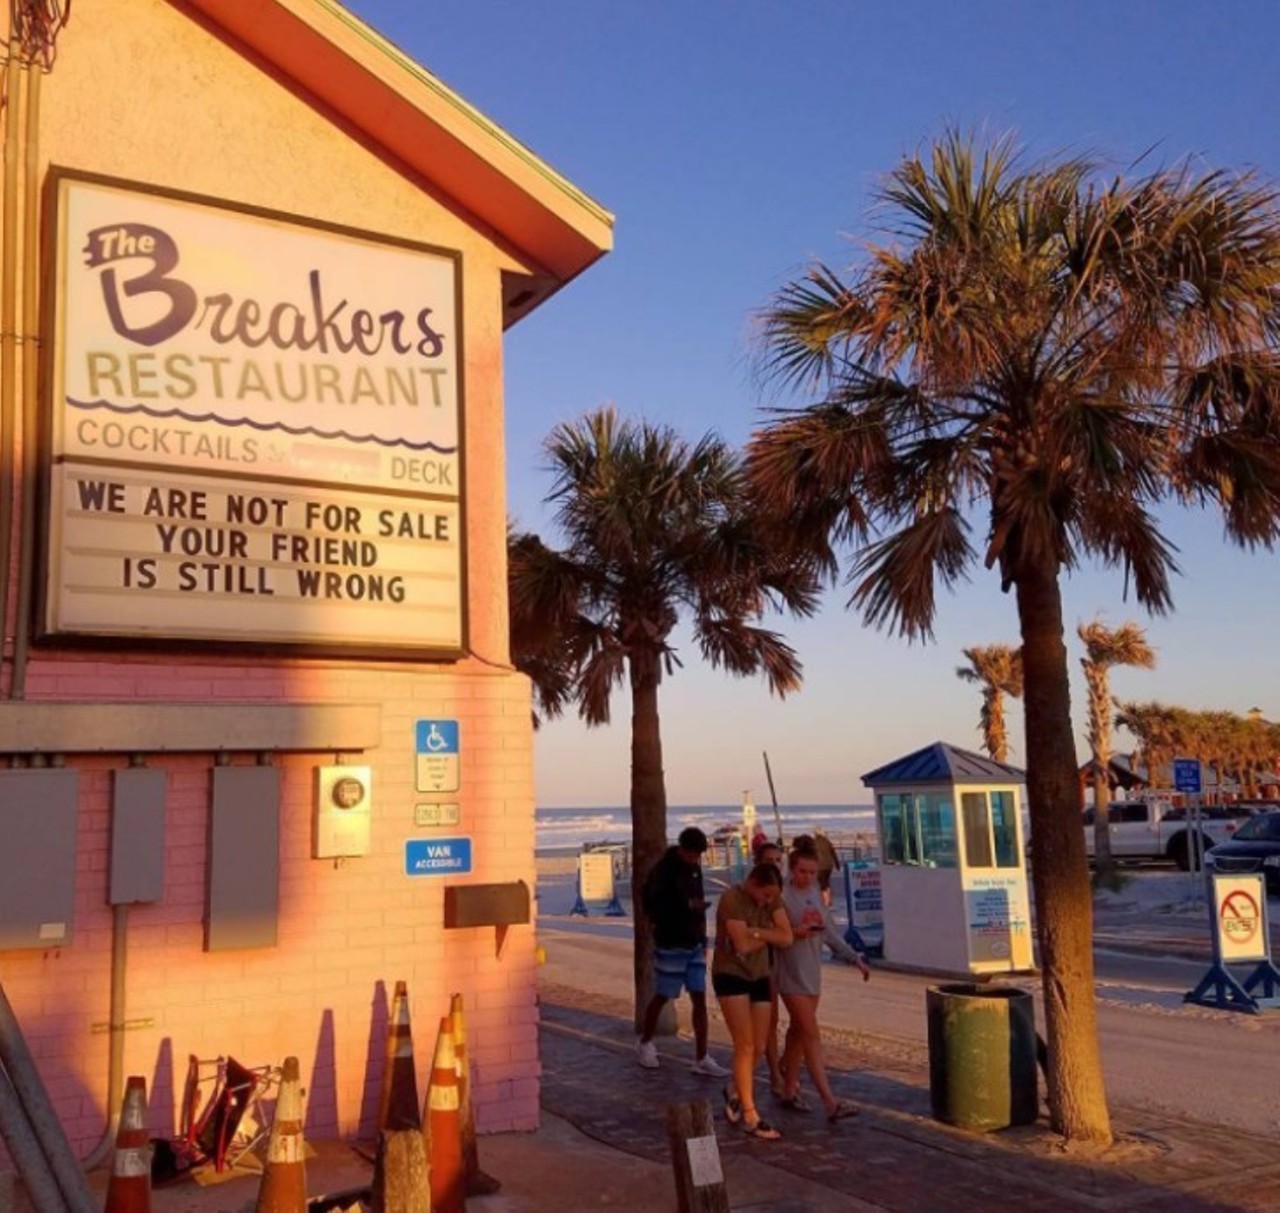 The Breakers Ocean Front Restaurant & Lounge
518 Flagler Ave., New Smyrna Beach, 386-428-2019 
The Breakers offers an impressive 17 different types of burgers. If burgers aren&#146;t your thing, there&#146;s plenty of seafood options. A great place to stop for a bite and some drinks after hitting the white sandy beaches, you&#146;ll recognize Breakers by its famous pink building. Happy hour runs from 4-7p.m. Monday through Friday.
Photo via scott_murrish/Instagram